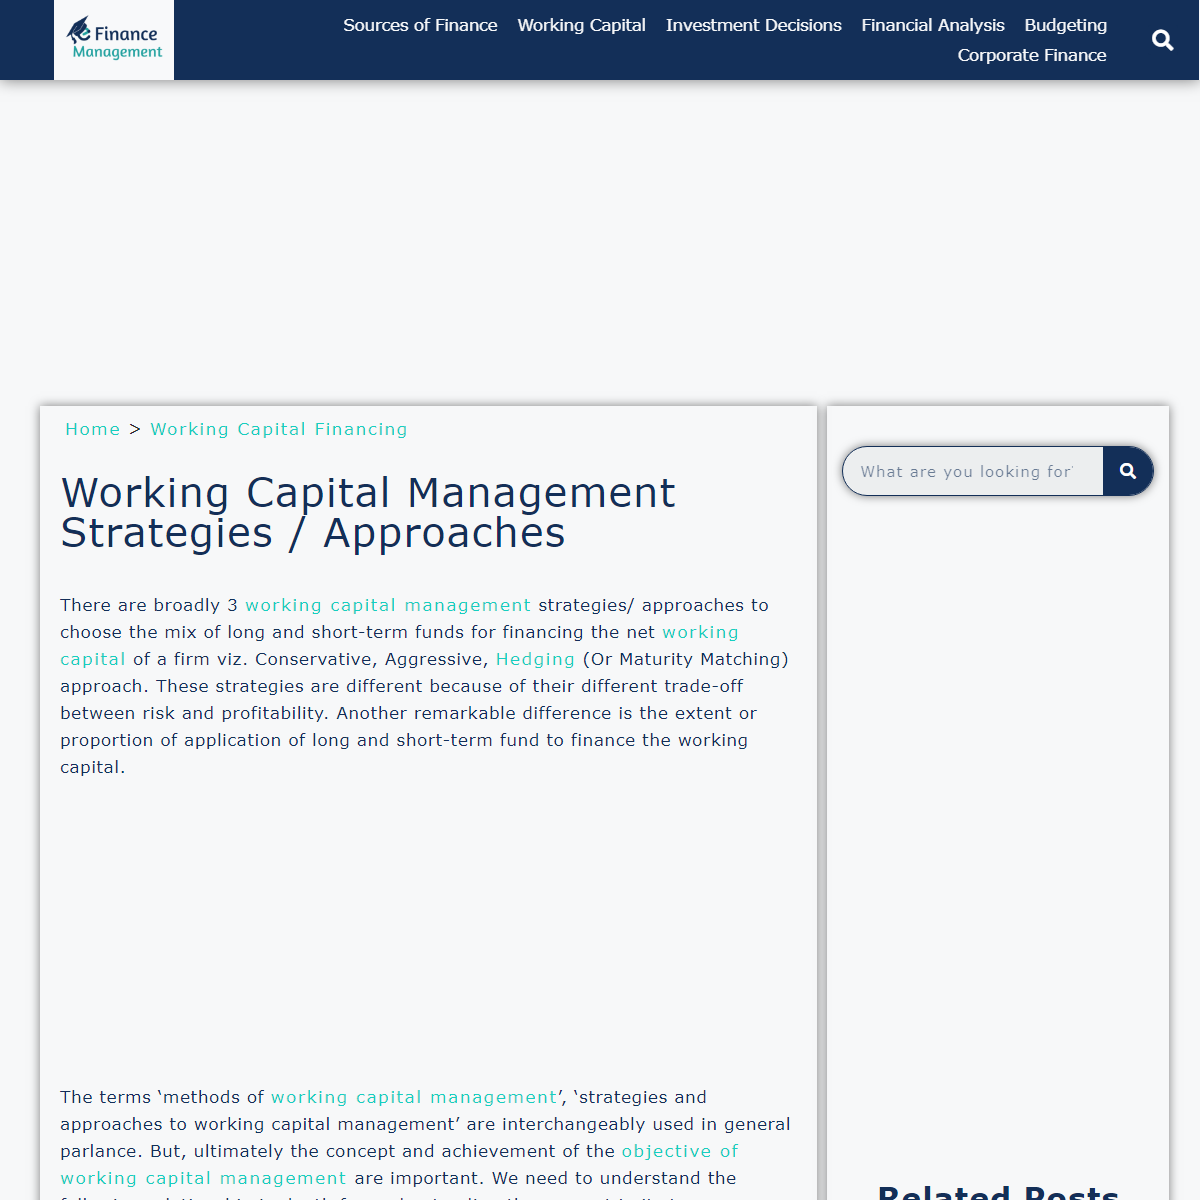 A complete backup of https://efinancemanagement.com/working-capital-financing/working-capital-management-strategies-approaches